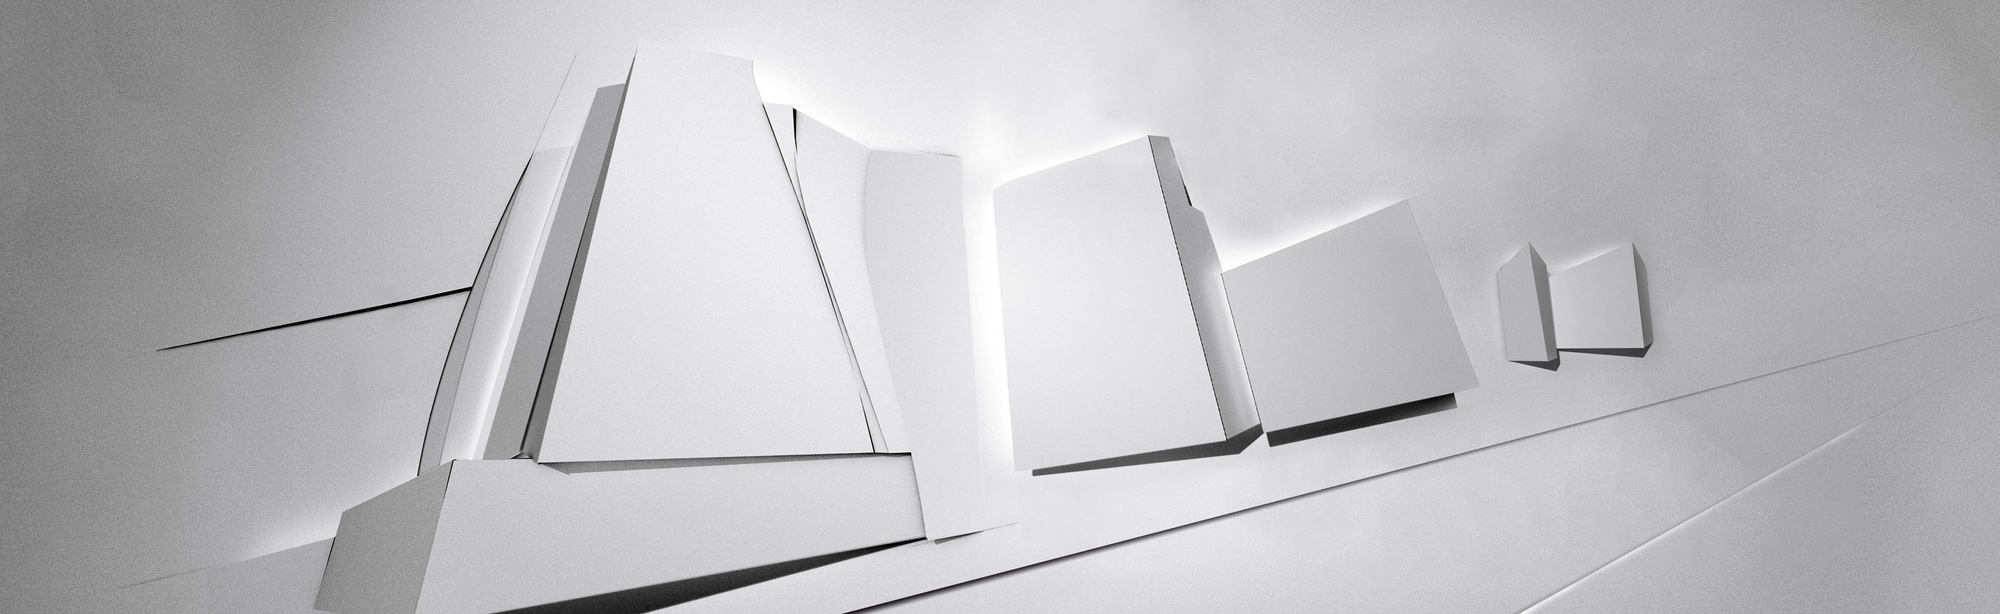 Render of white, three-dimensional shapes breaking out of a flat surface